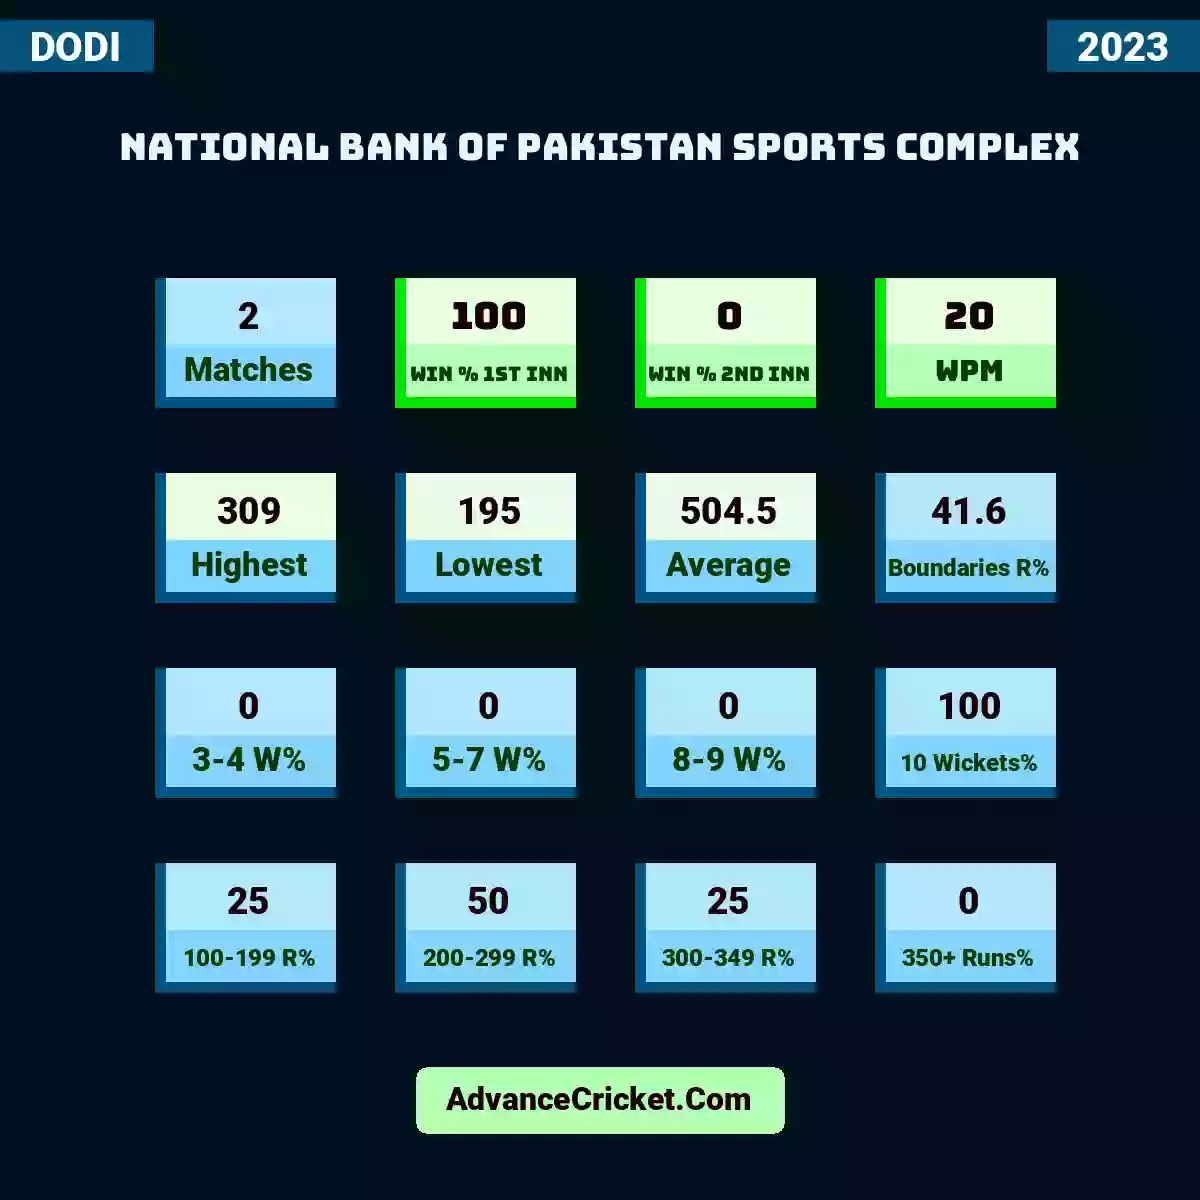 Image showing National Bank of Pakistan Sports Complex with Matches: 2, Win % 1st Inn: 100, Win % 2nd Inn: 0, WPM: 20, Highest: 309, Lowest: 195, Average: 504.5, Boundaries R%: 41.6, 3-4 W%: 0, 5-7 W%: 0, 8-9 W%: 0, 10 Wickets%: 100, 100-199 R%: 25, 200-299 R%: 50, 300-349 R%: 25, 350+ Runs%: 0.